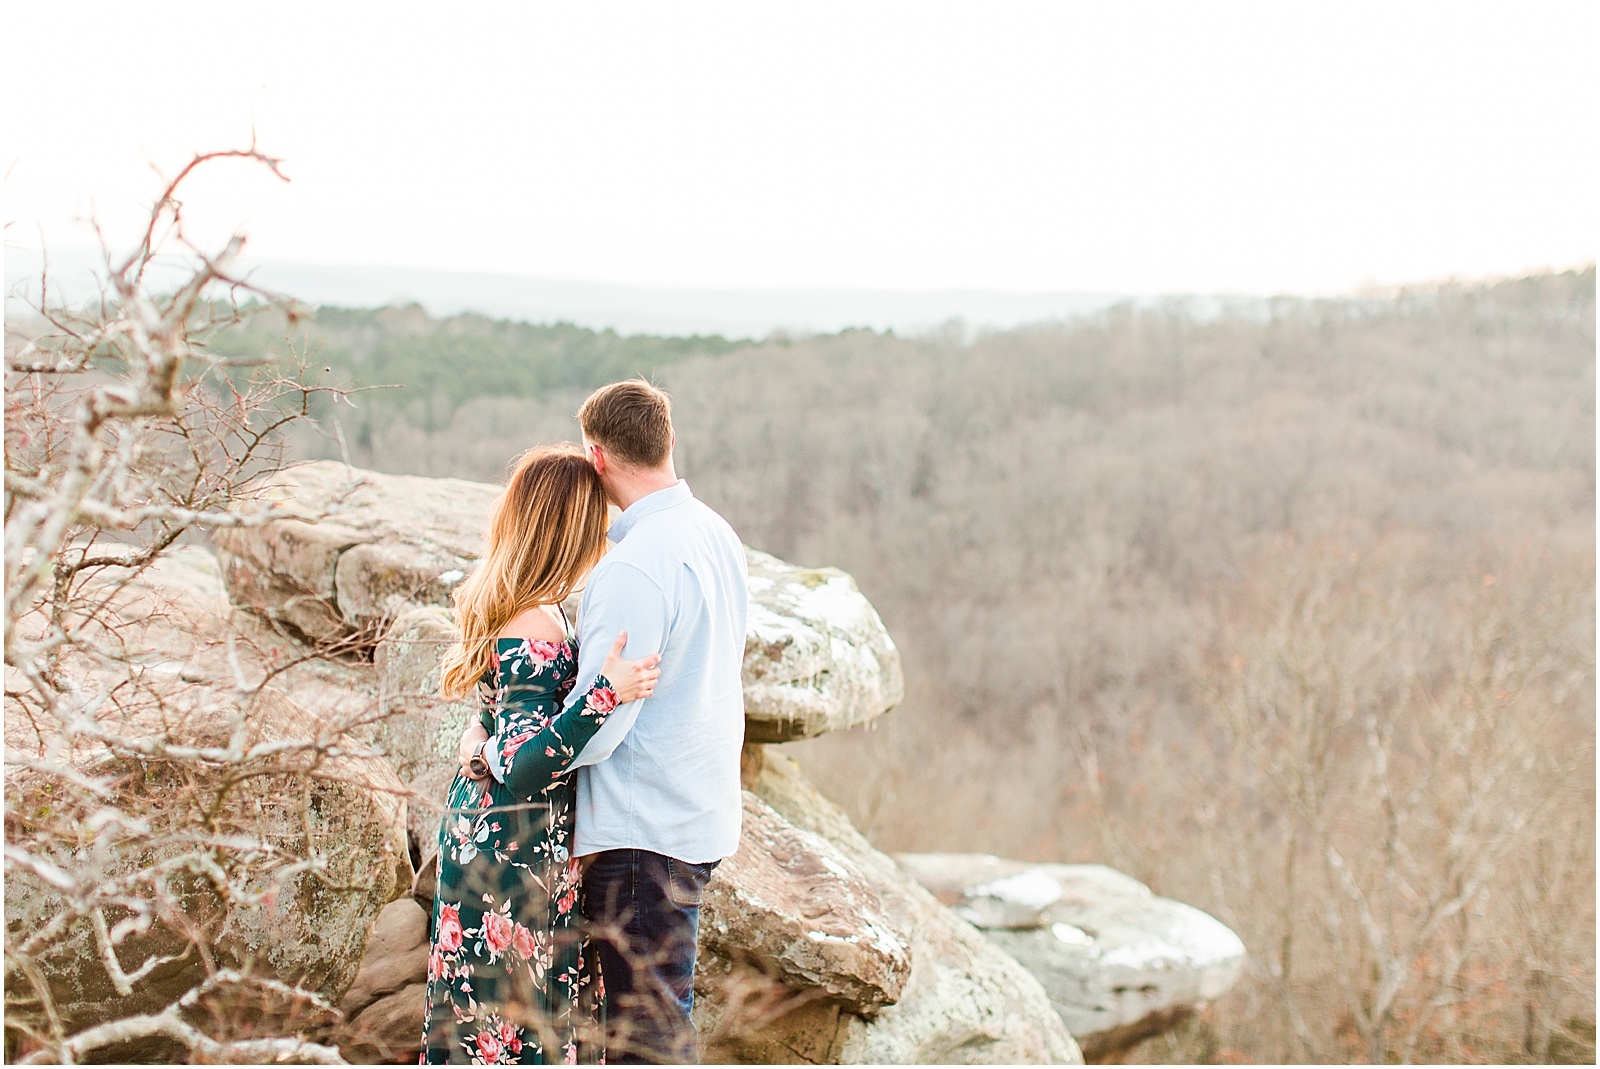 A Sunny Garden of the Gods Engagement Session | Shiloh and Lee | Bret and Brandie Photography098.jpg